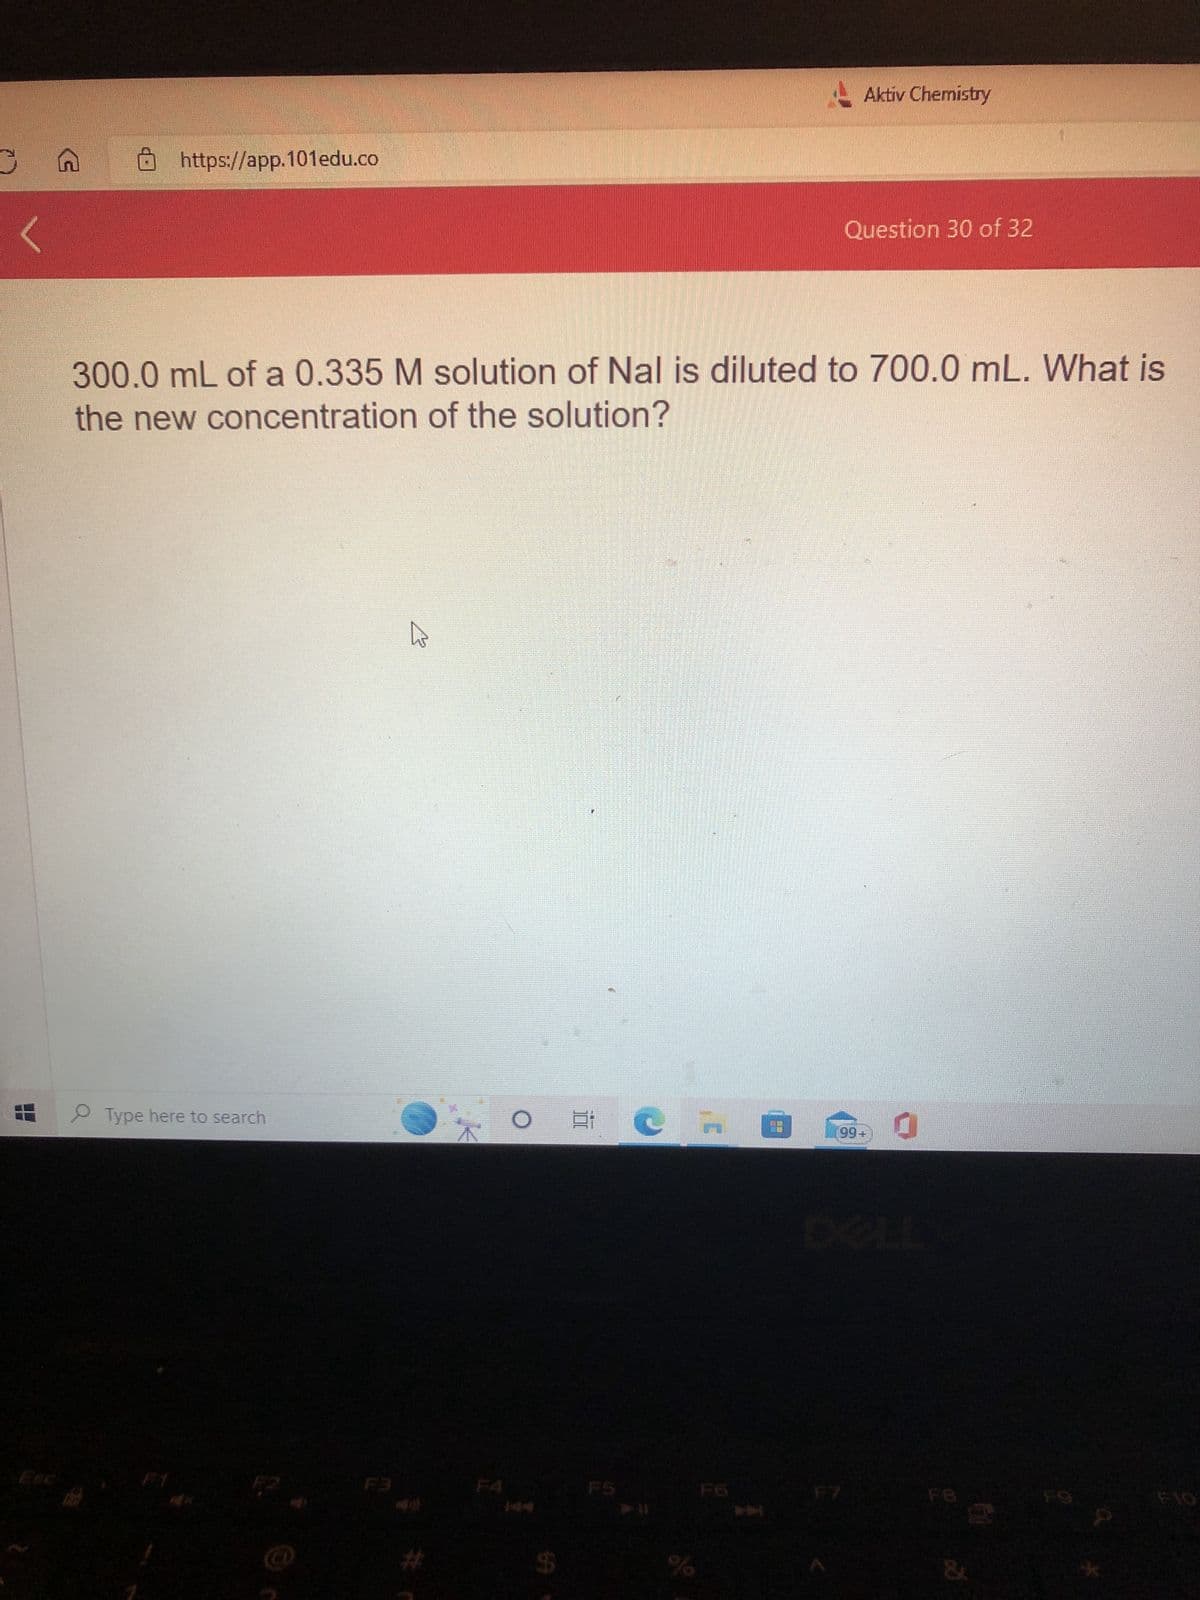 G
https://app.101edu.co
Type here to search
1
300.0 mL of a 0.335 M solution of Nal is diluted to 700.0 mL. What is
the new concentration of the solution?
Aktiv Chemistry
%
Question 30 of 32
99+